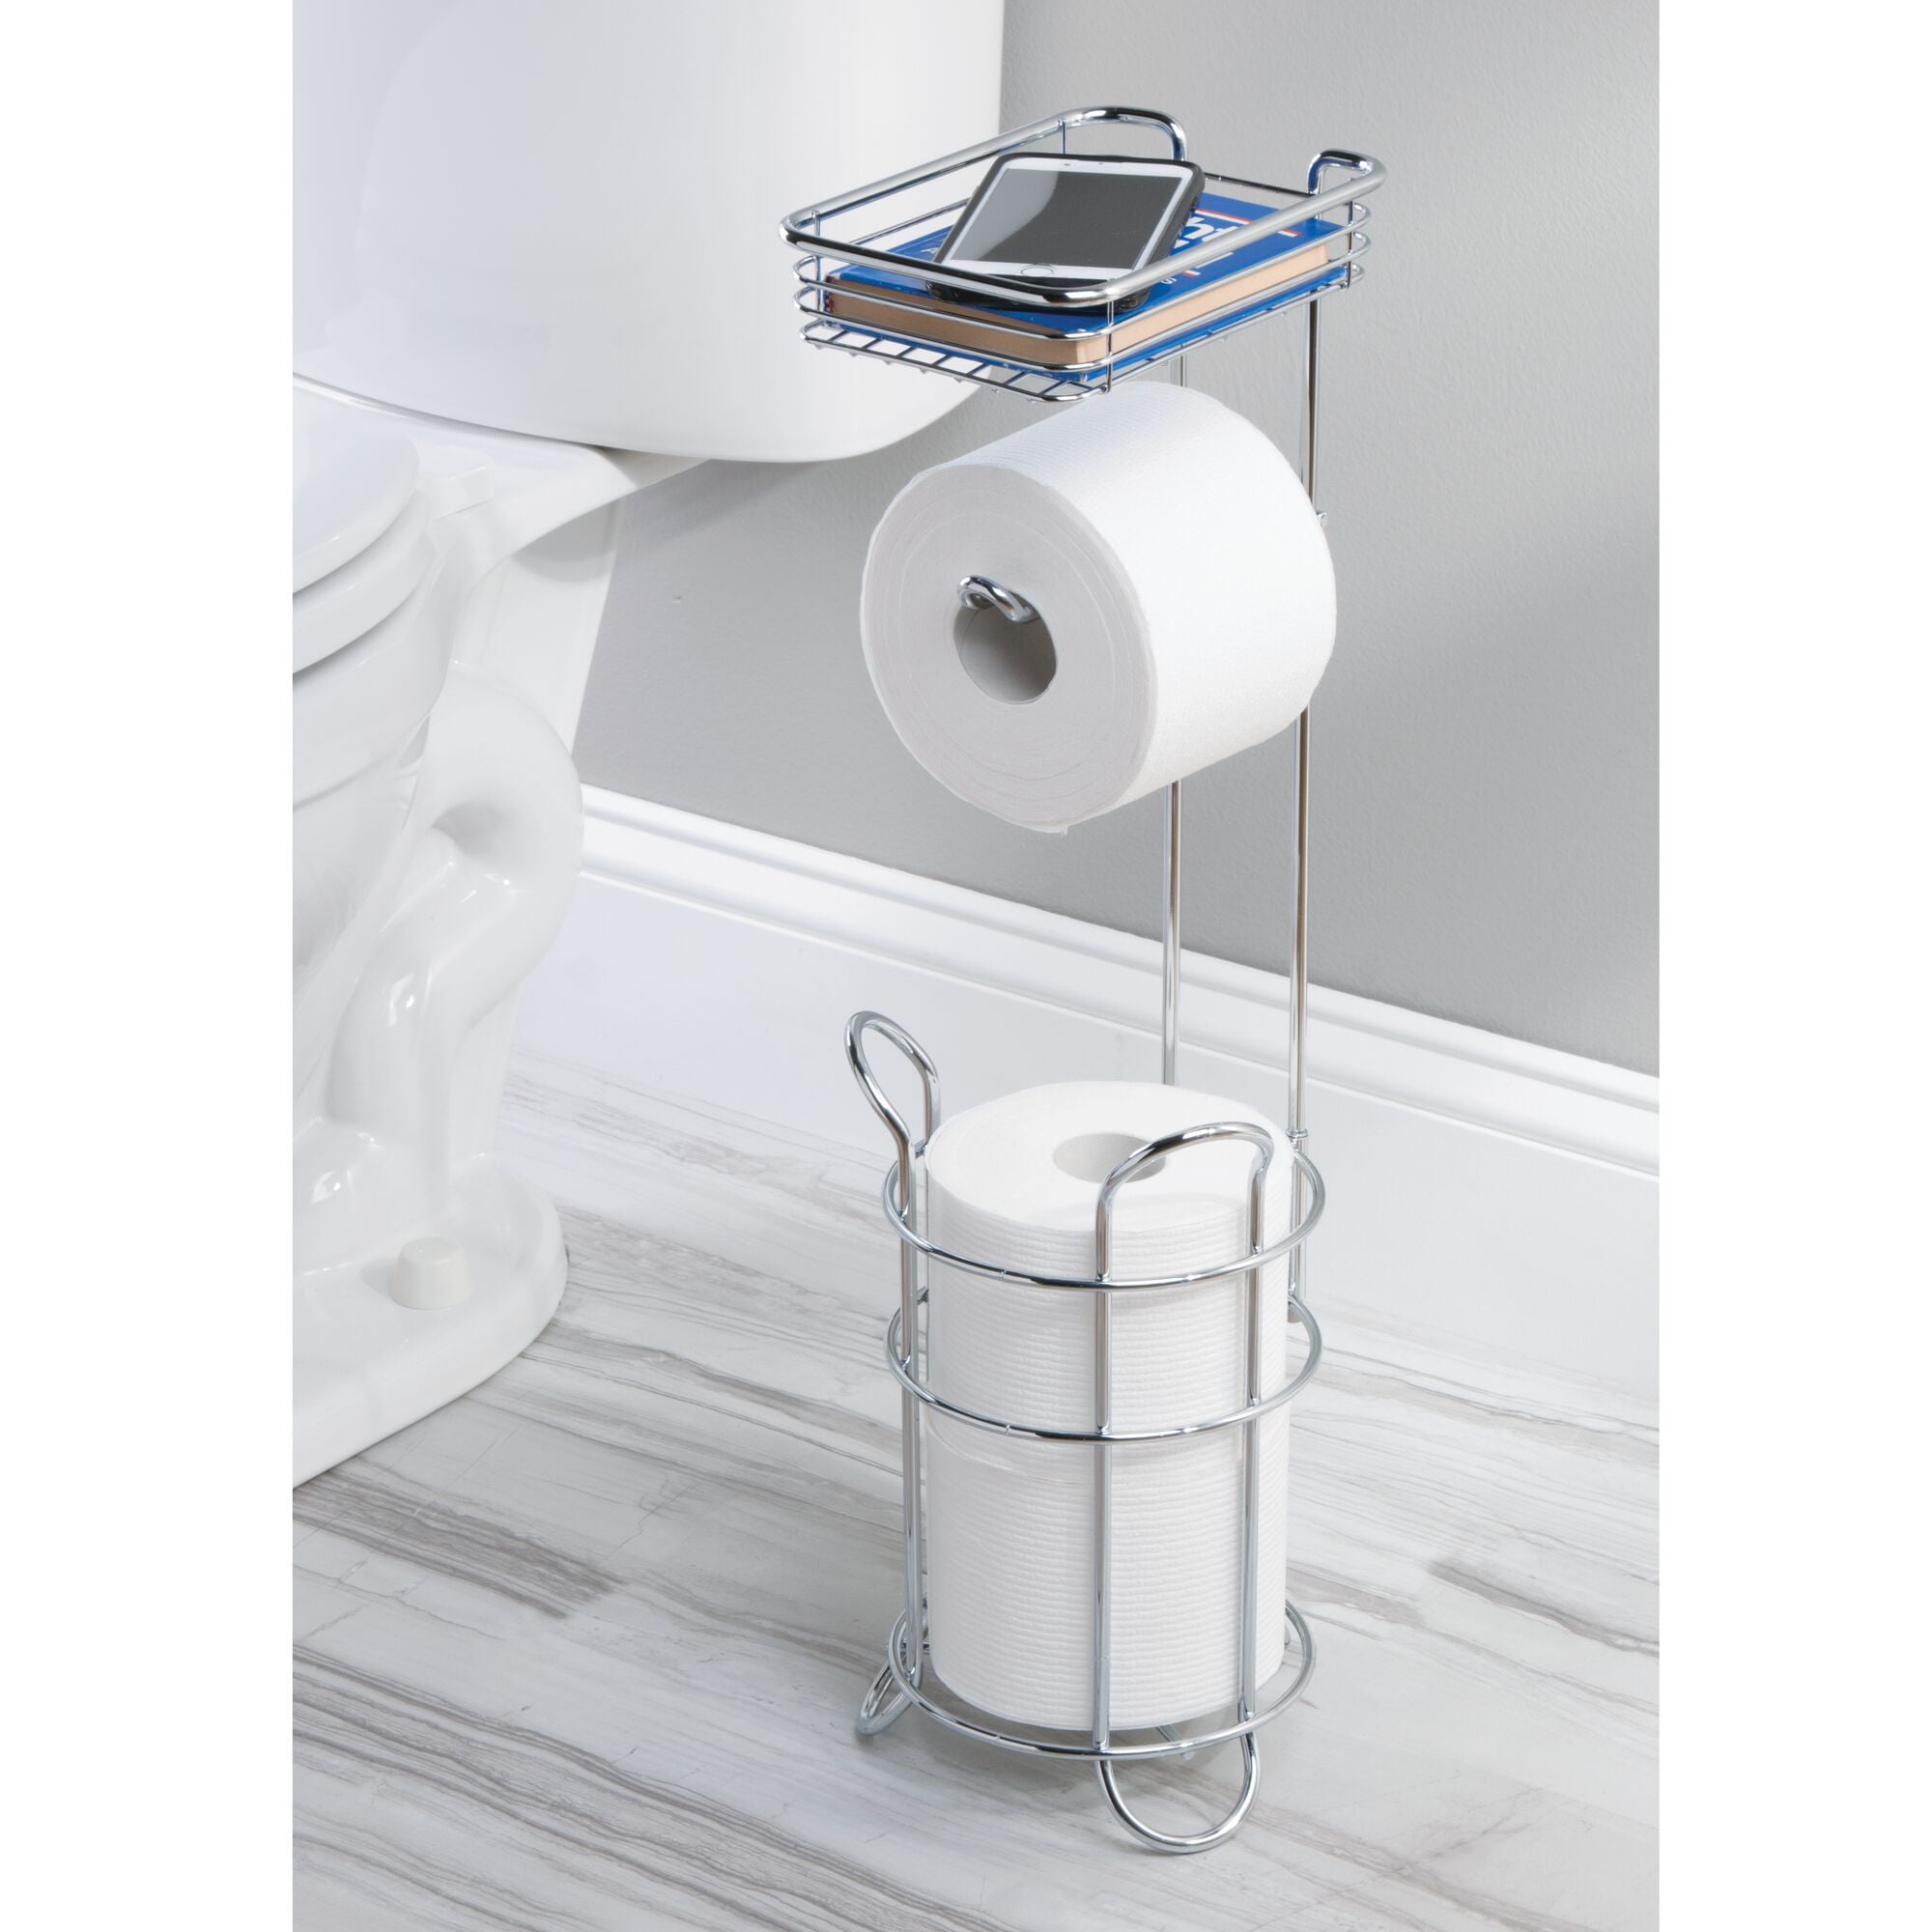 Mobile Phone Holds 3 Rolls Bathroom Storage Organization mDesign Freestanding Metal Wire Toilet Paper Roll Dispenser Holder and Extra Roll Reserve with Storage Shelf for Cell Matte Black MetroDecor 8790MDBST